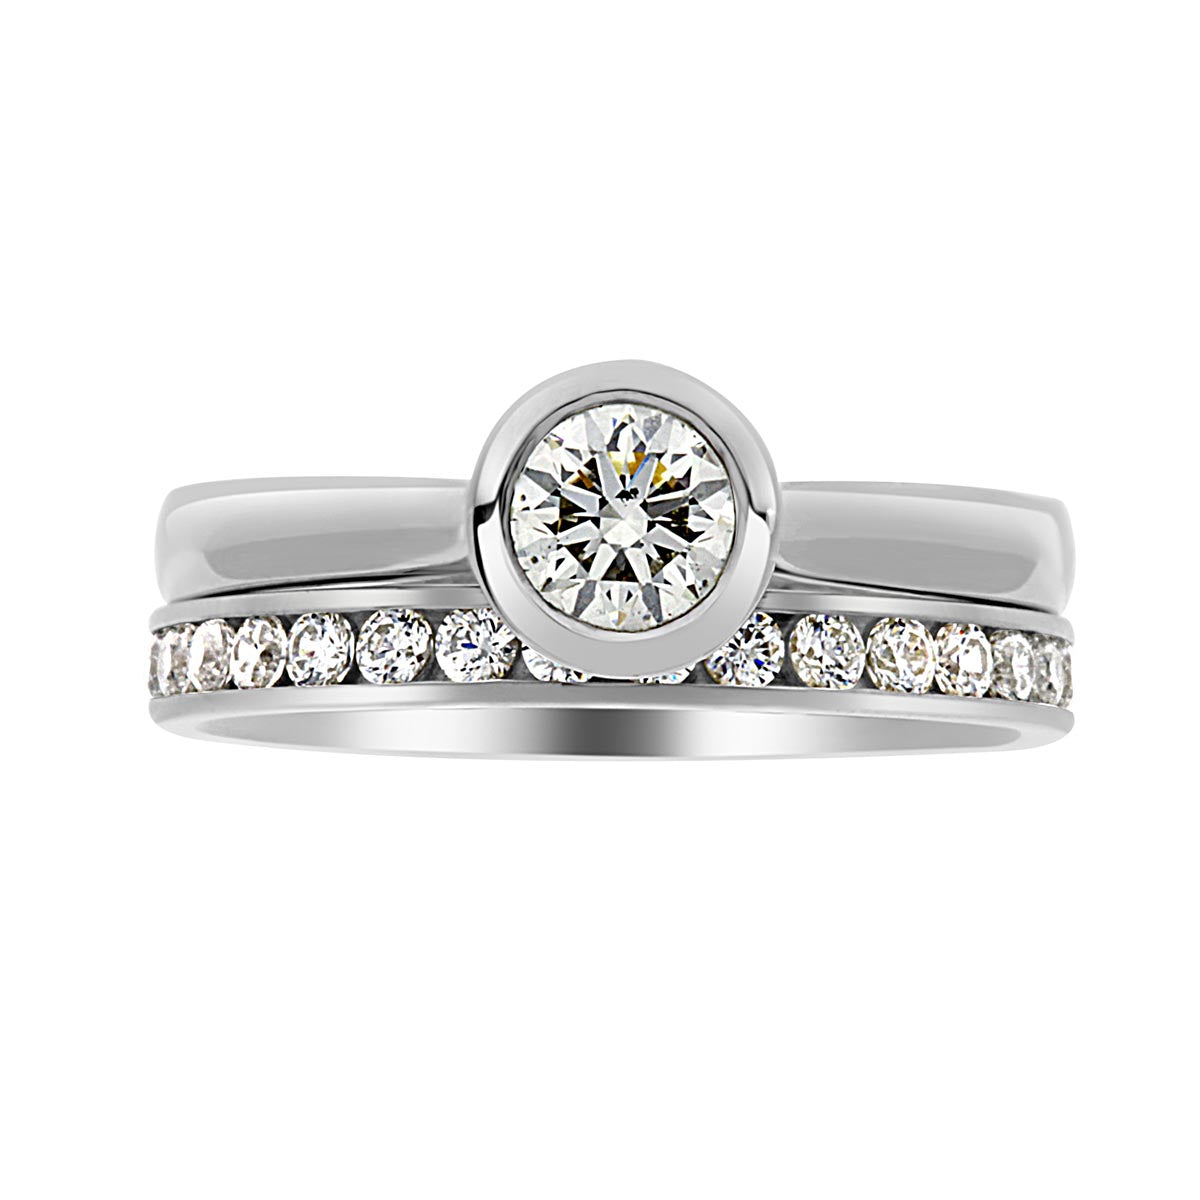 Bezel Set Engagement ring in white gold with a diamond wedding ring